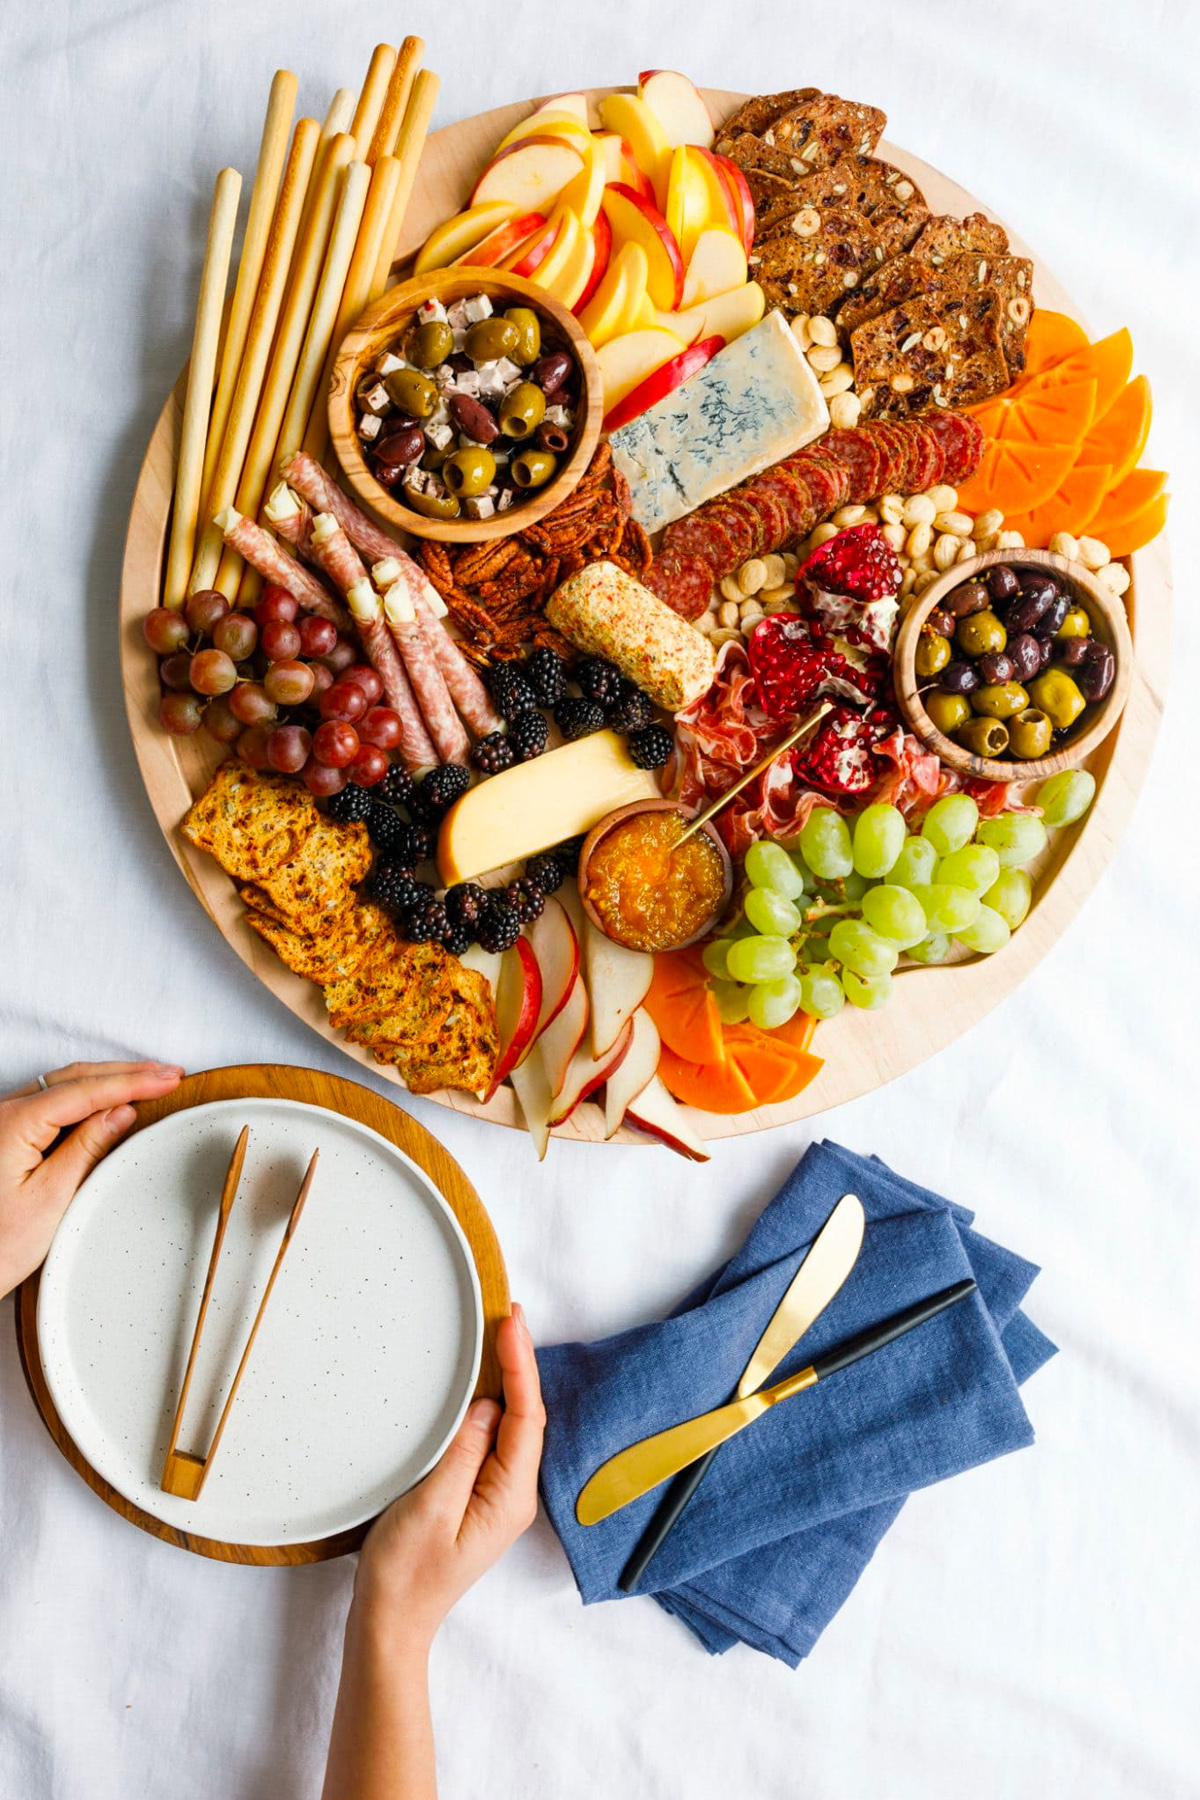 Crackers, cheese, meat, olives, and nuts are included on Reluctant Entertainer's winter charcuterie board.